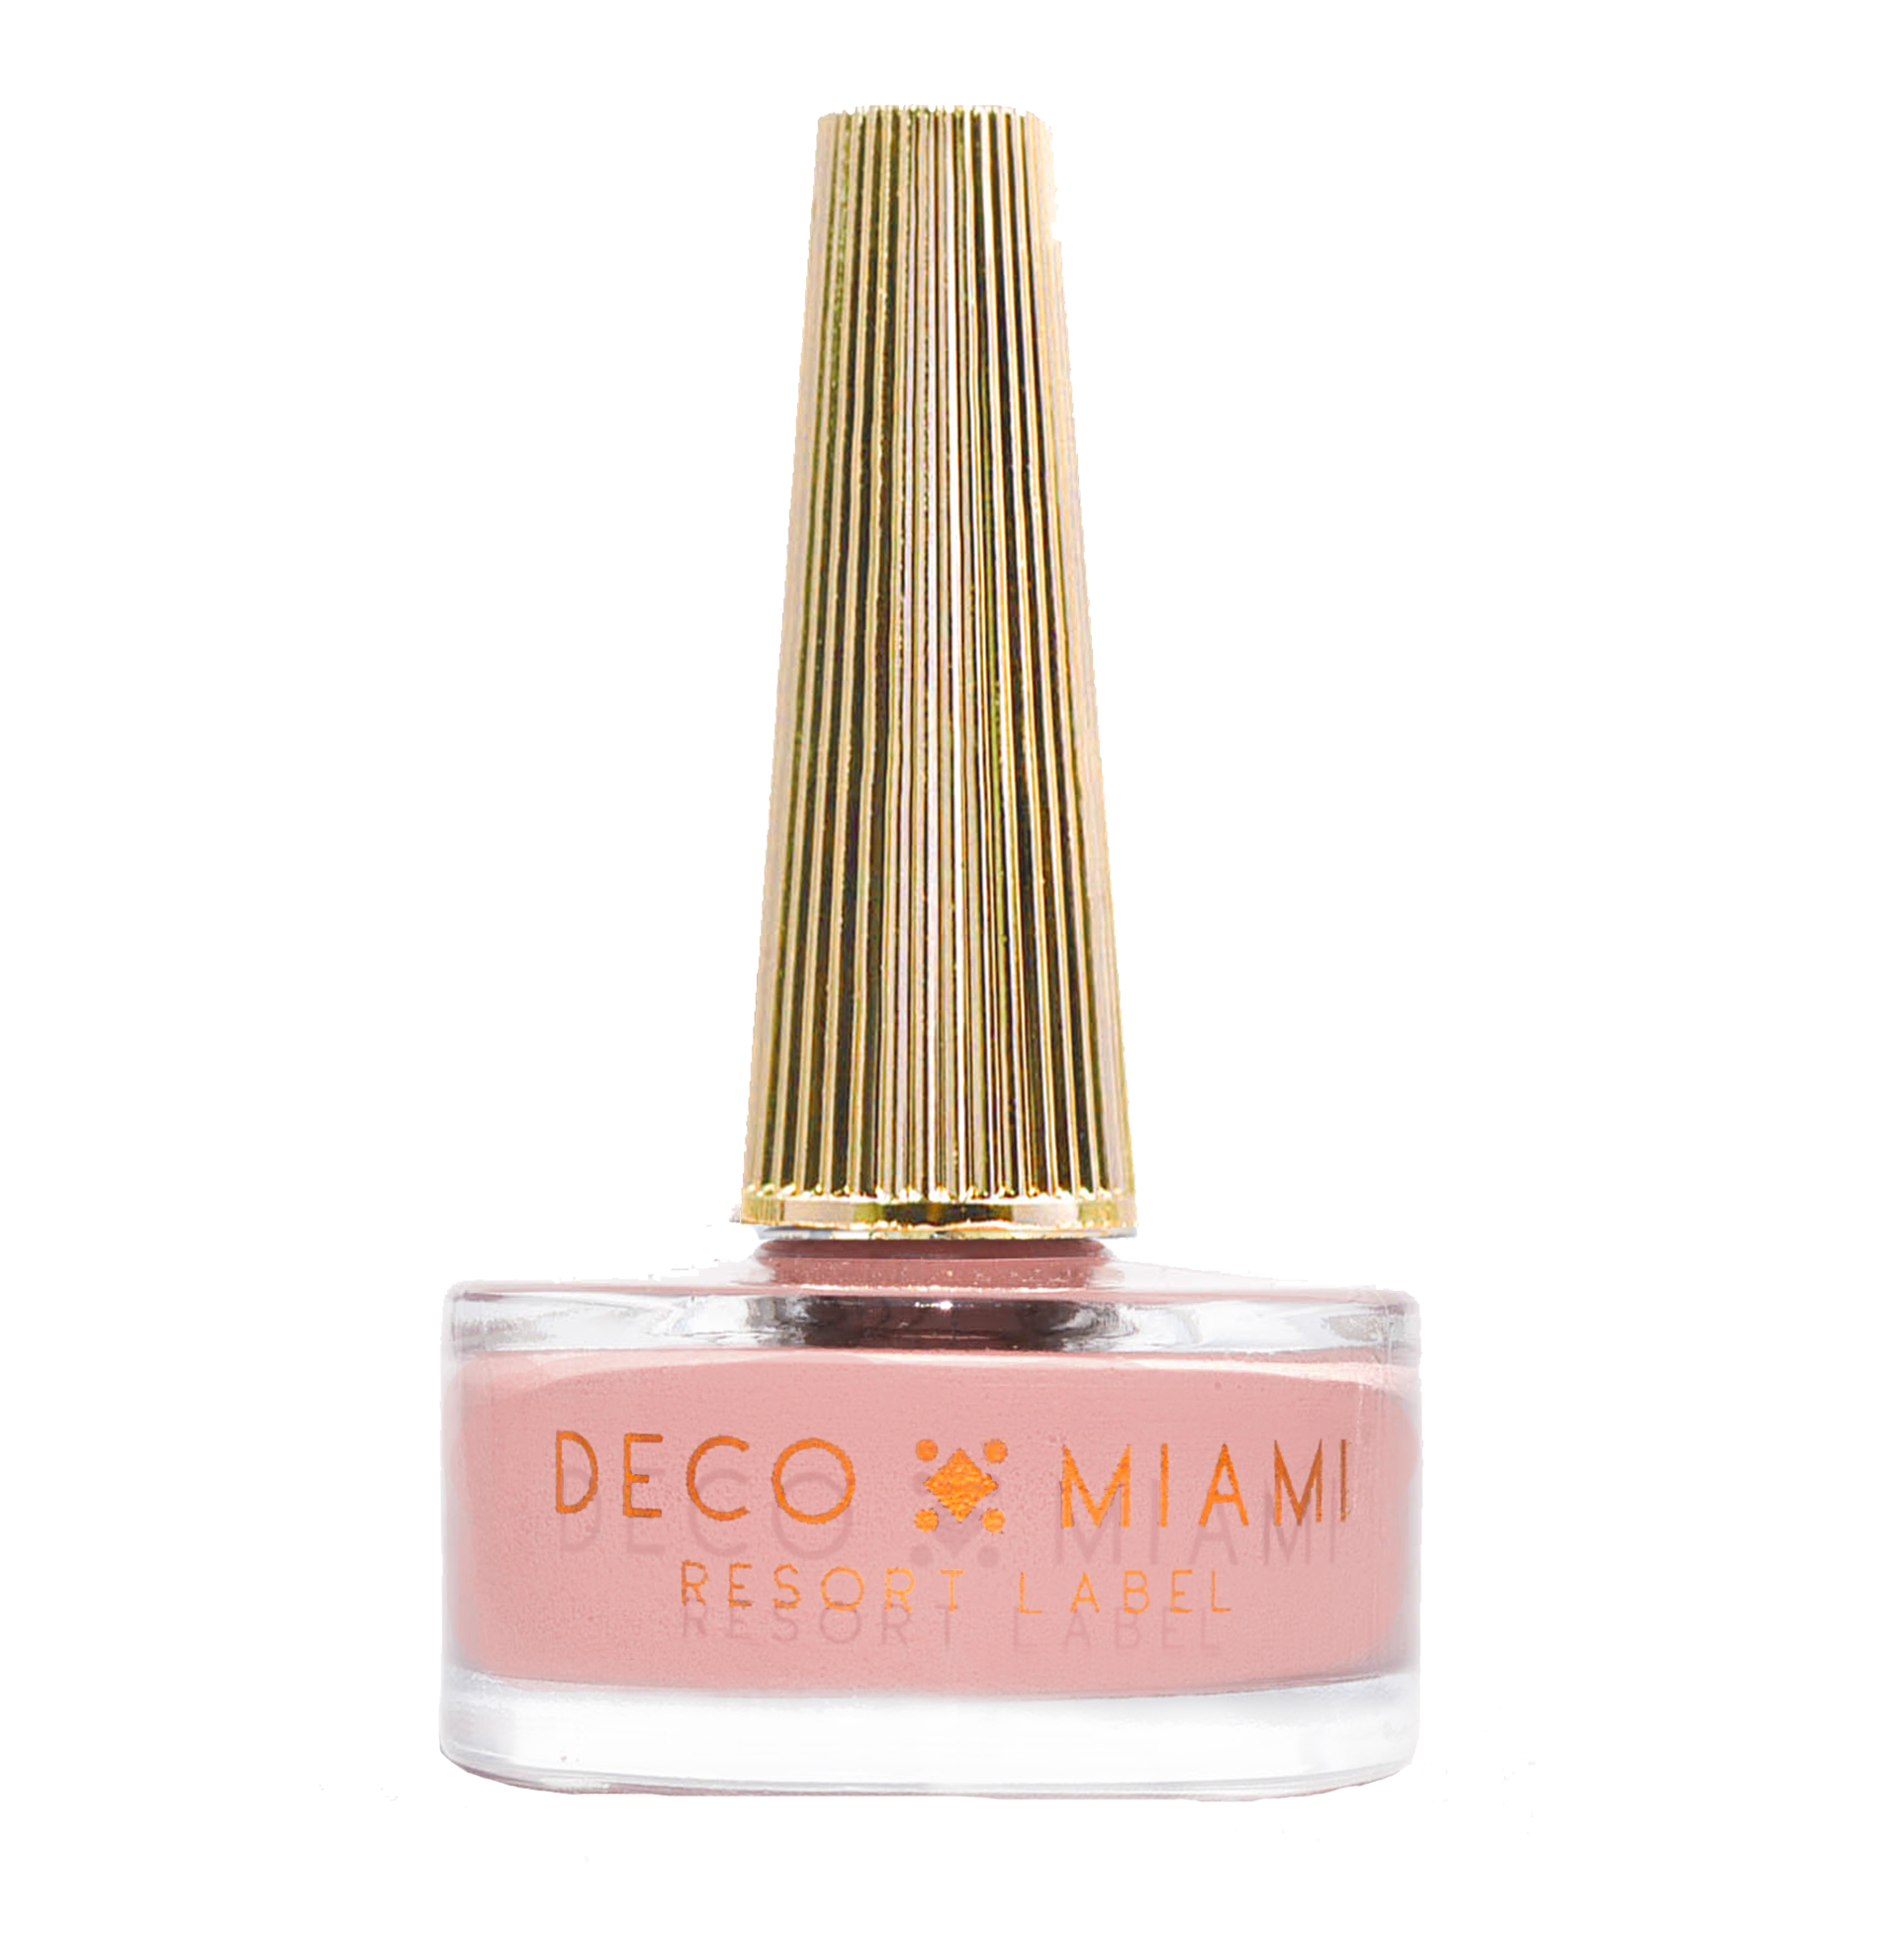 INSTAFAMOUS - 14.8ML - nude pink crème nail lacquer by Deco Miami